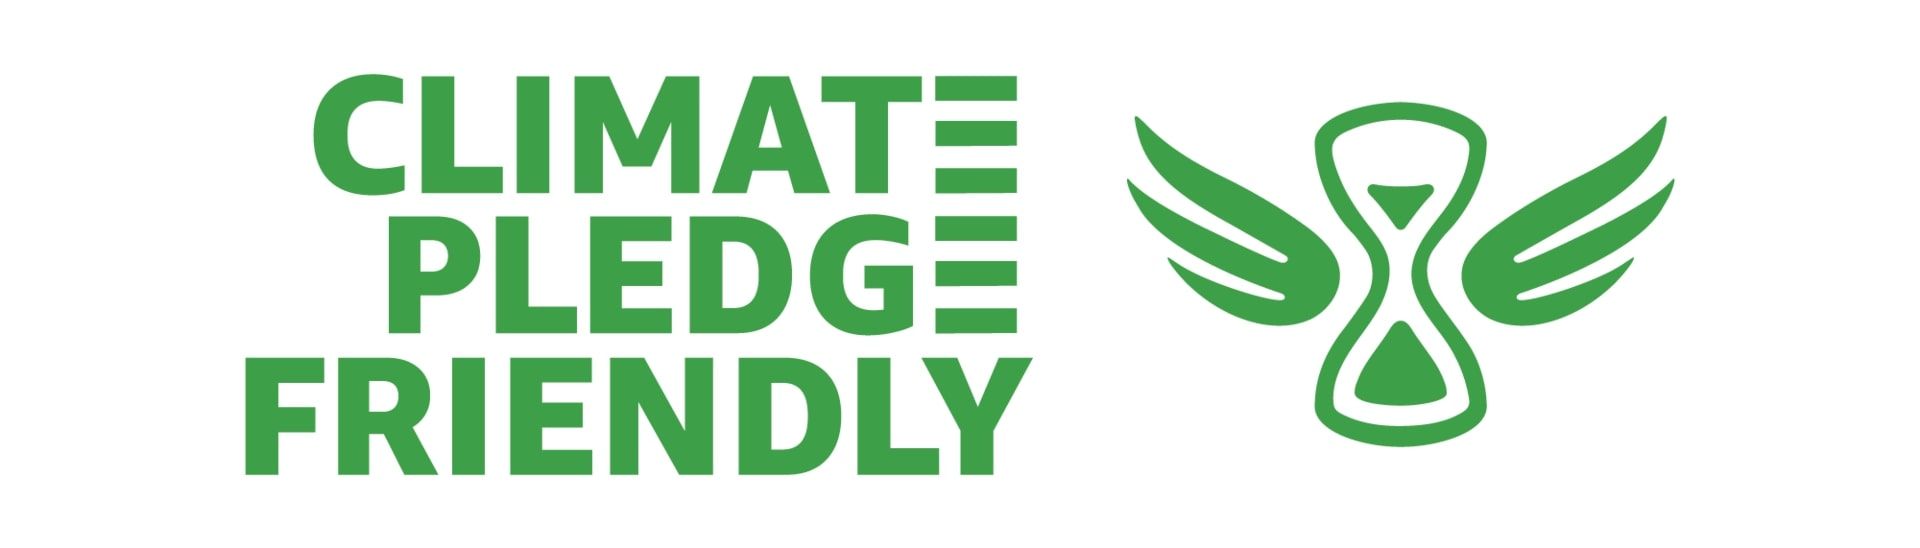 Climate-Friendly badge